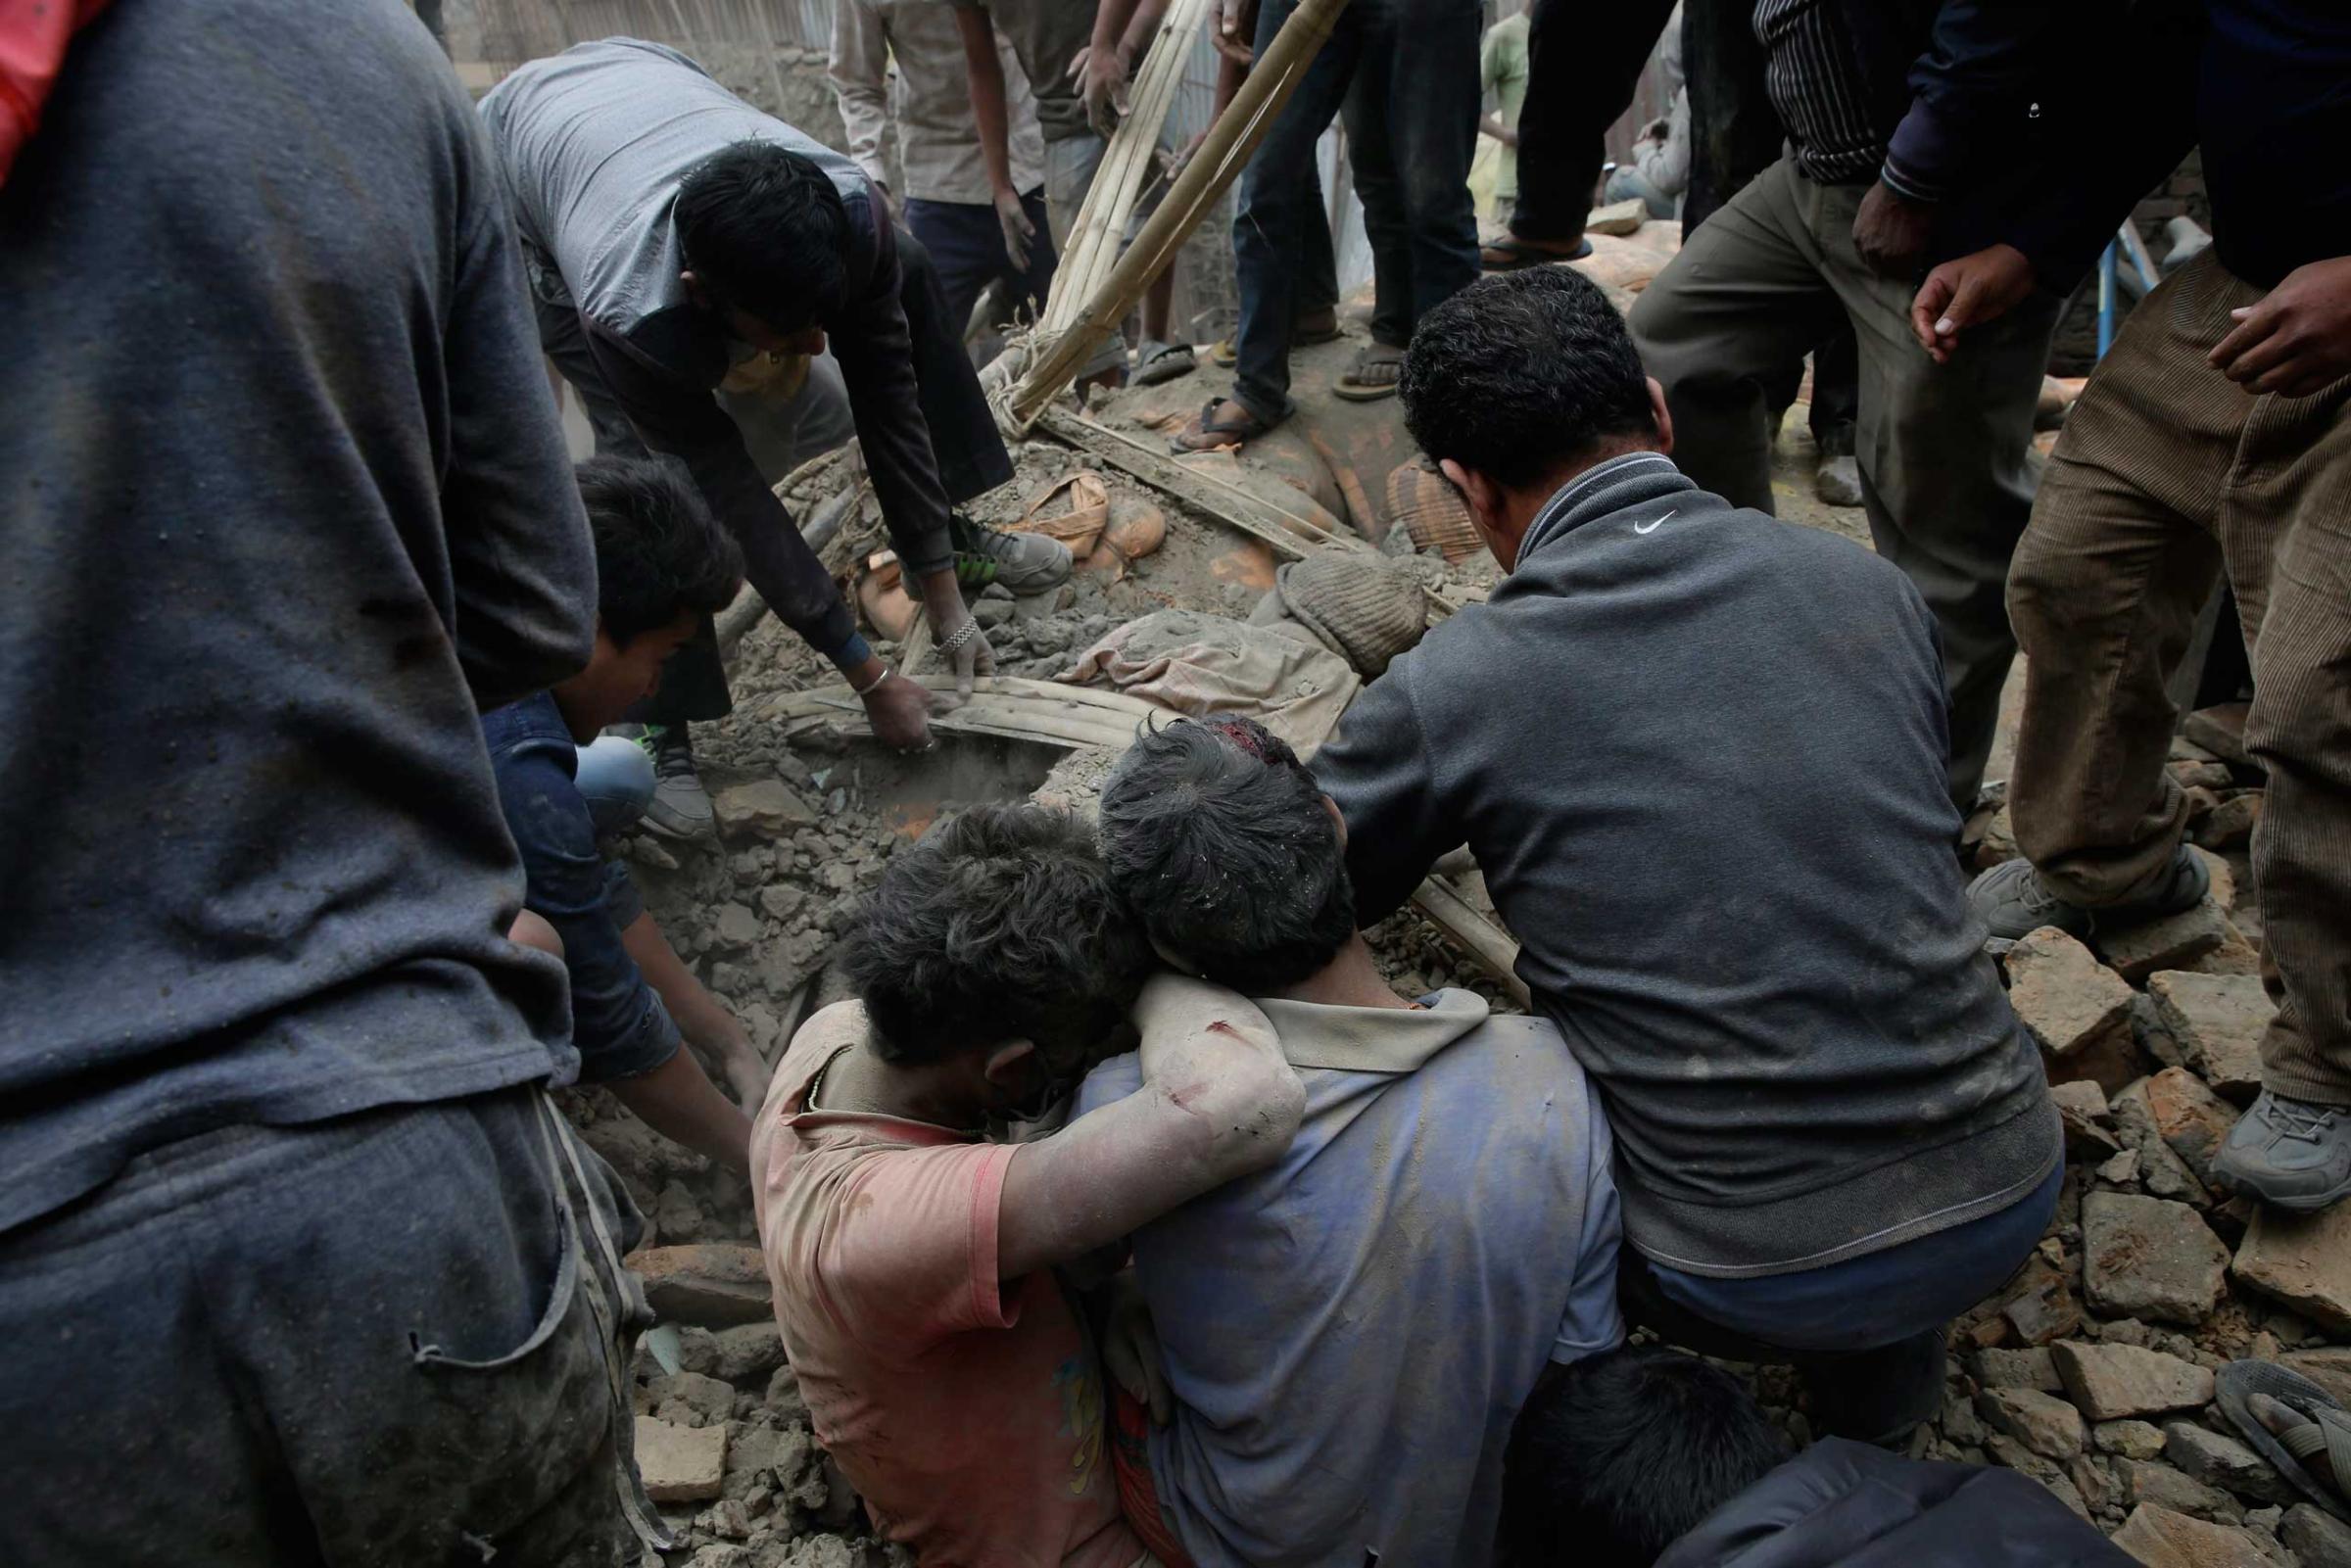 People dig through rubble for victims in Kathmandu.